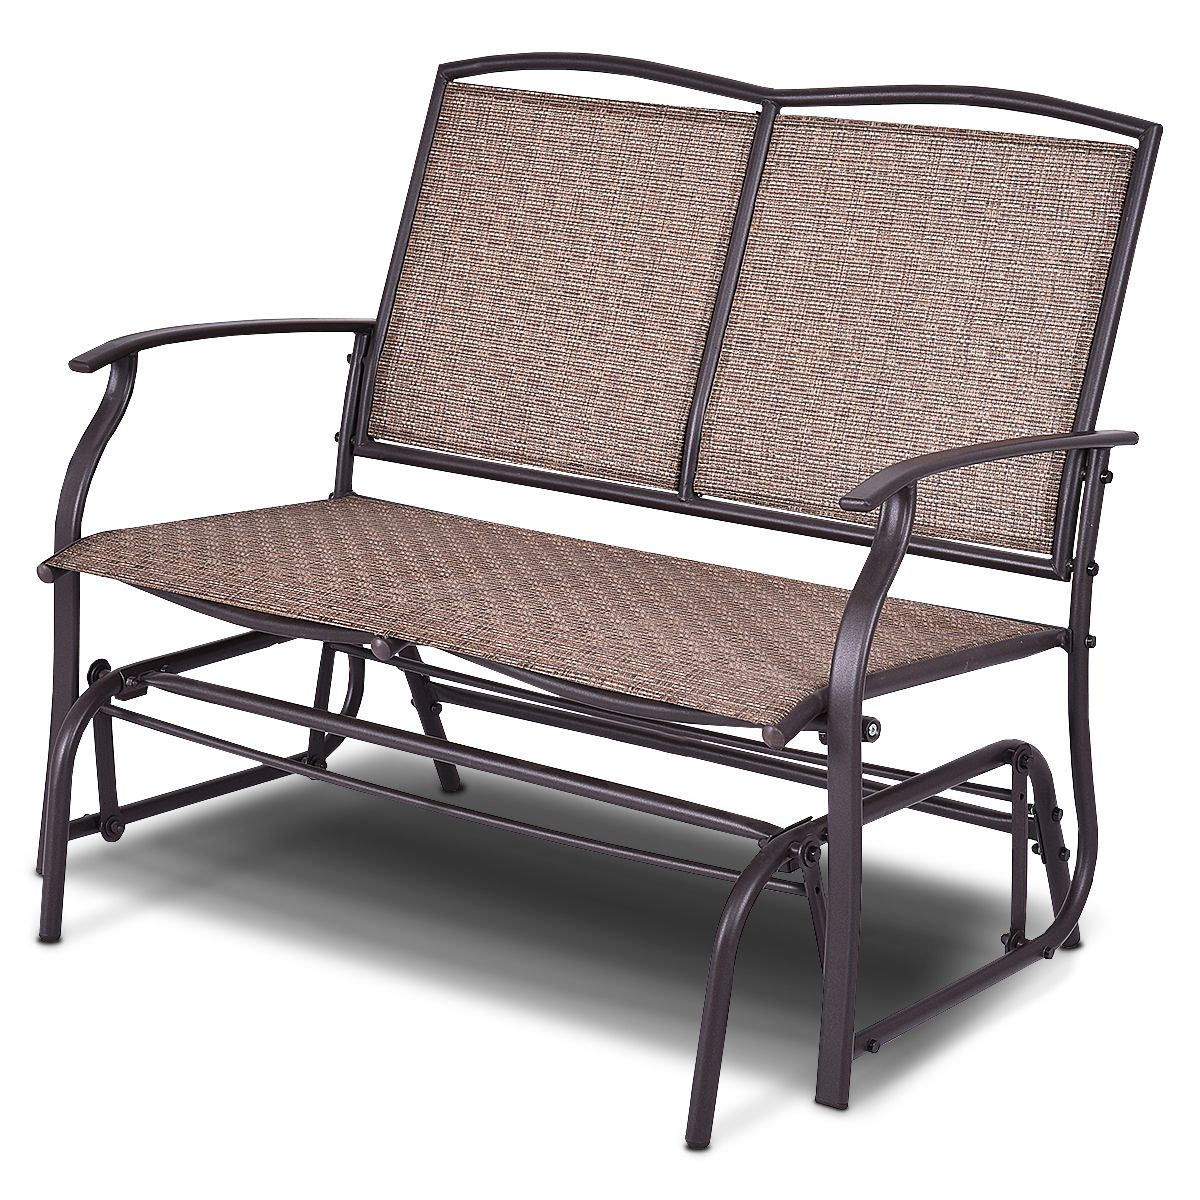 Latest Double Glider Loveseats Within Costway Patio Glider Rocking Bench Double 2 Person Chair (View 21 of 30)